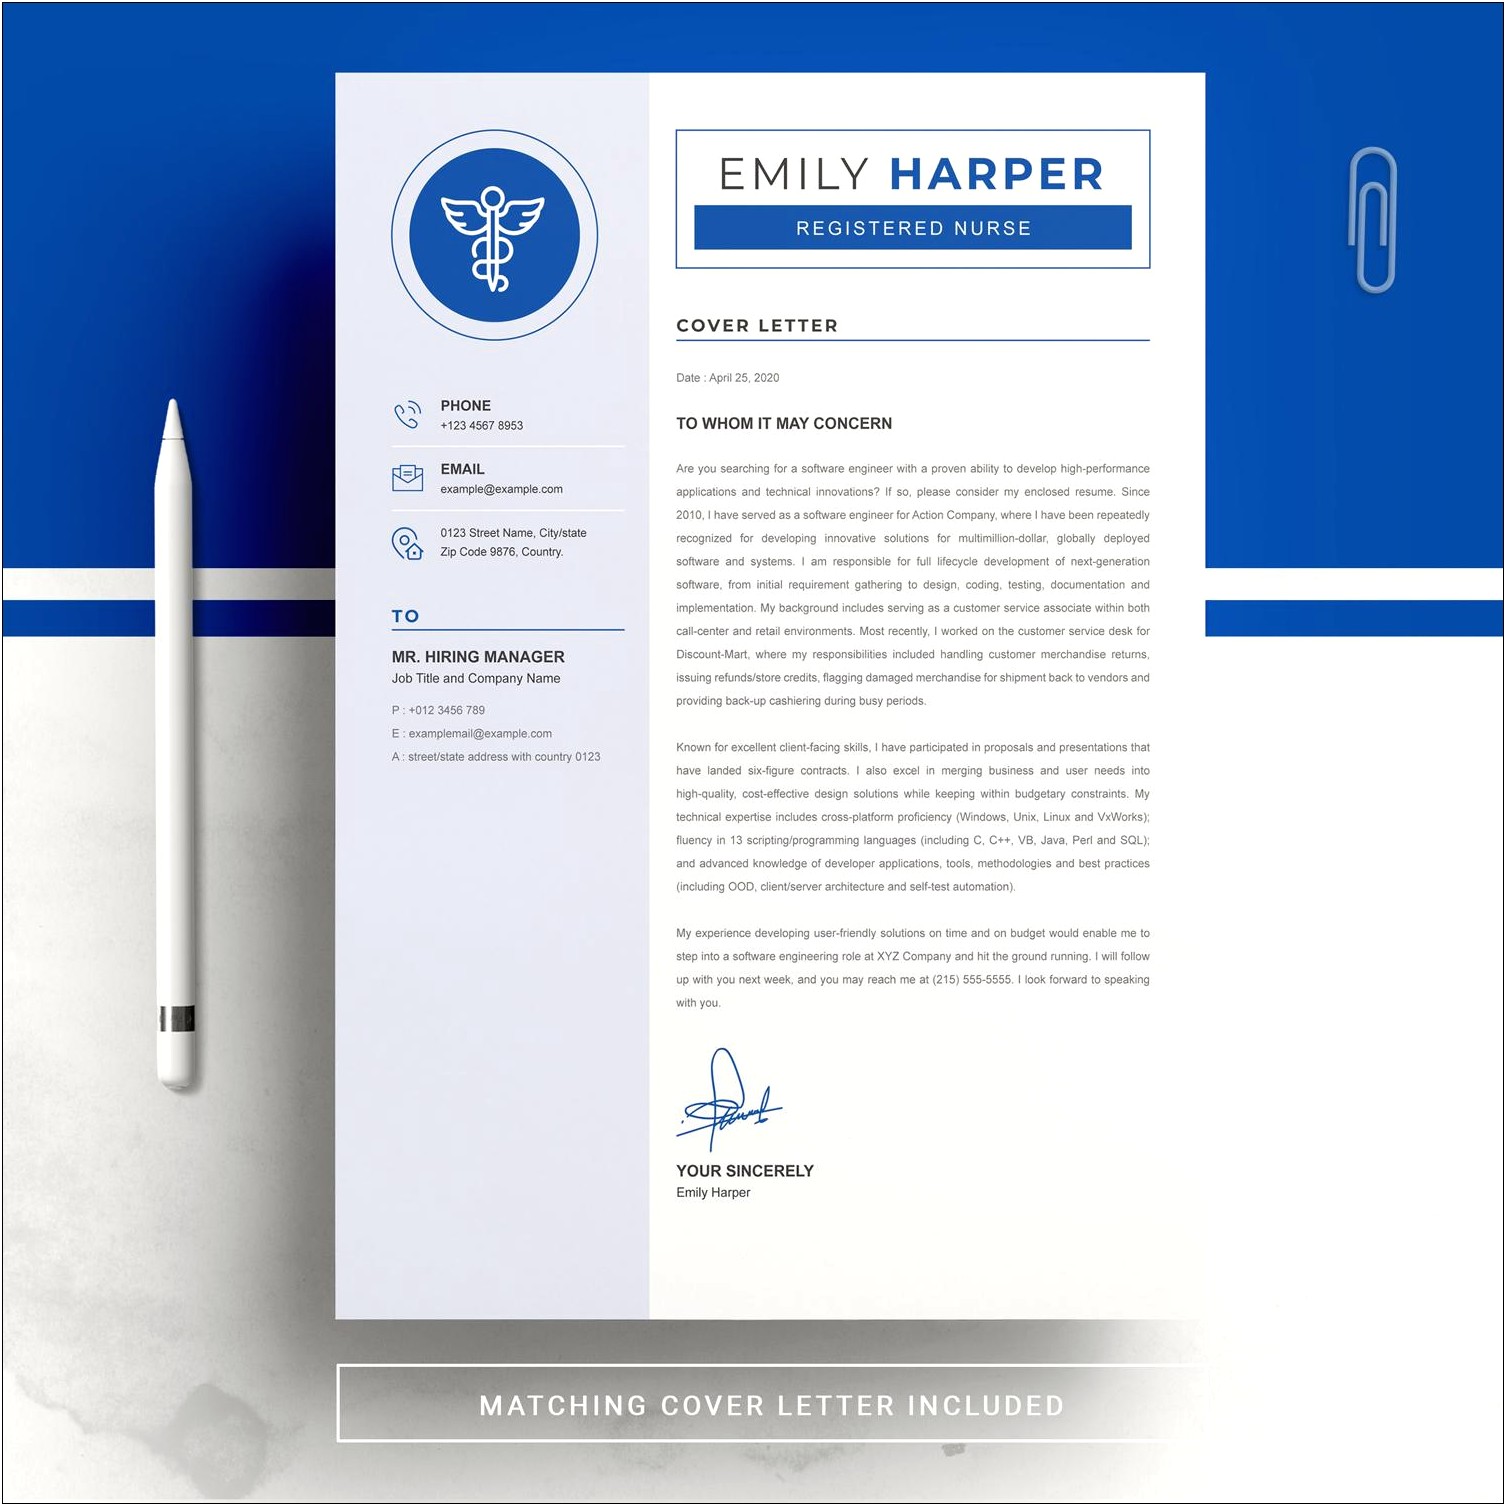 Resume Template Examples For A Registered Nurse